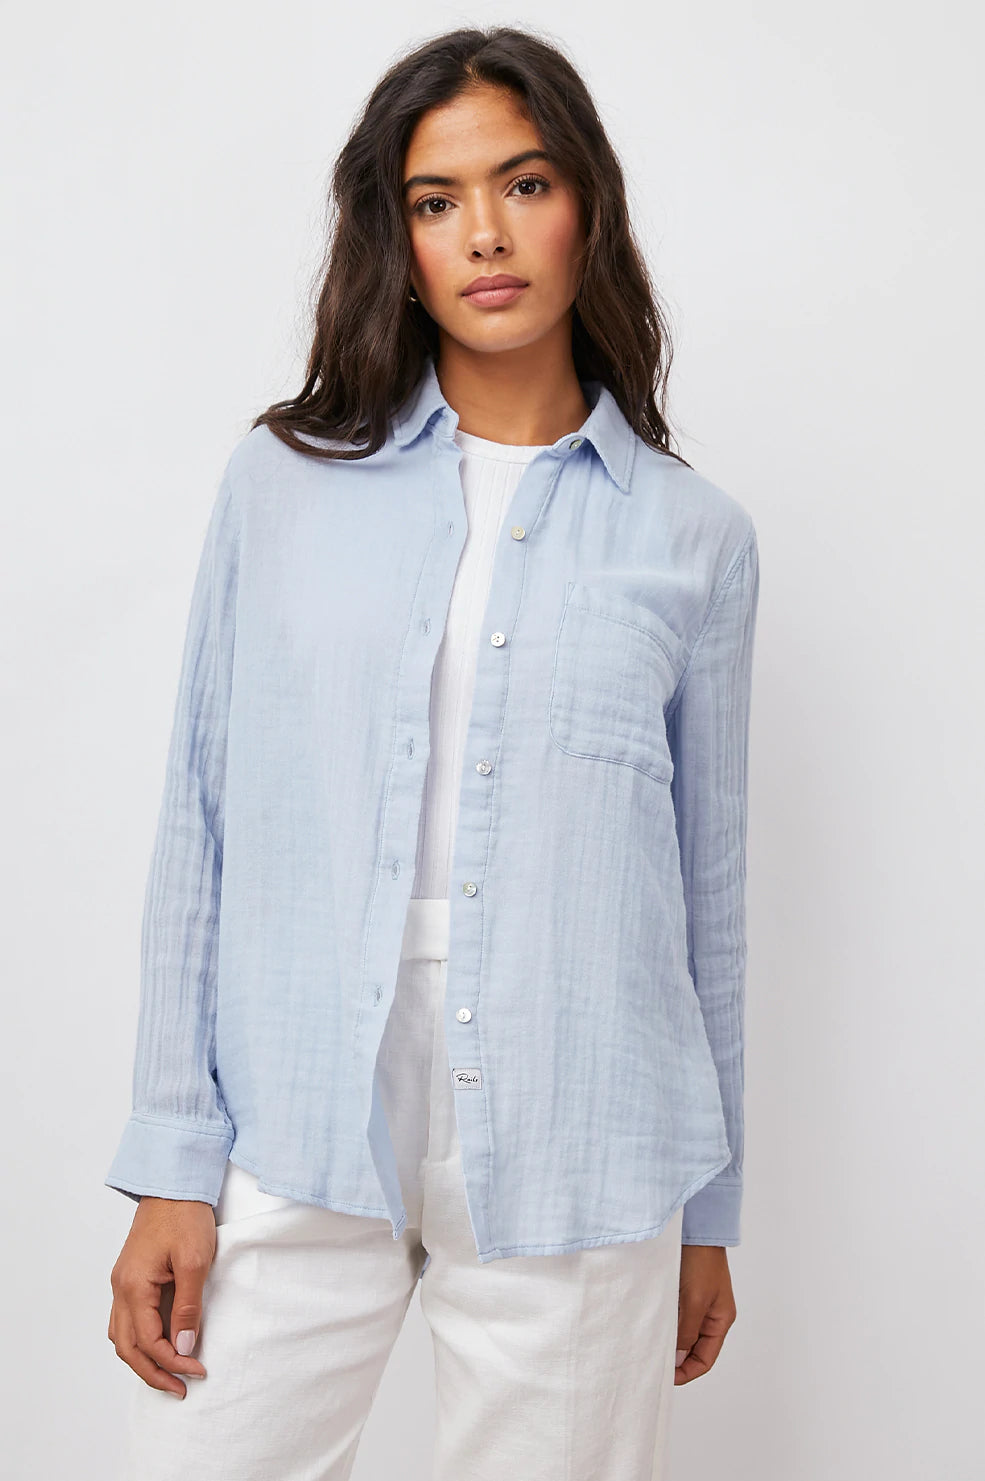 Ellis Top in Bluebell - Madison&